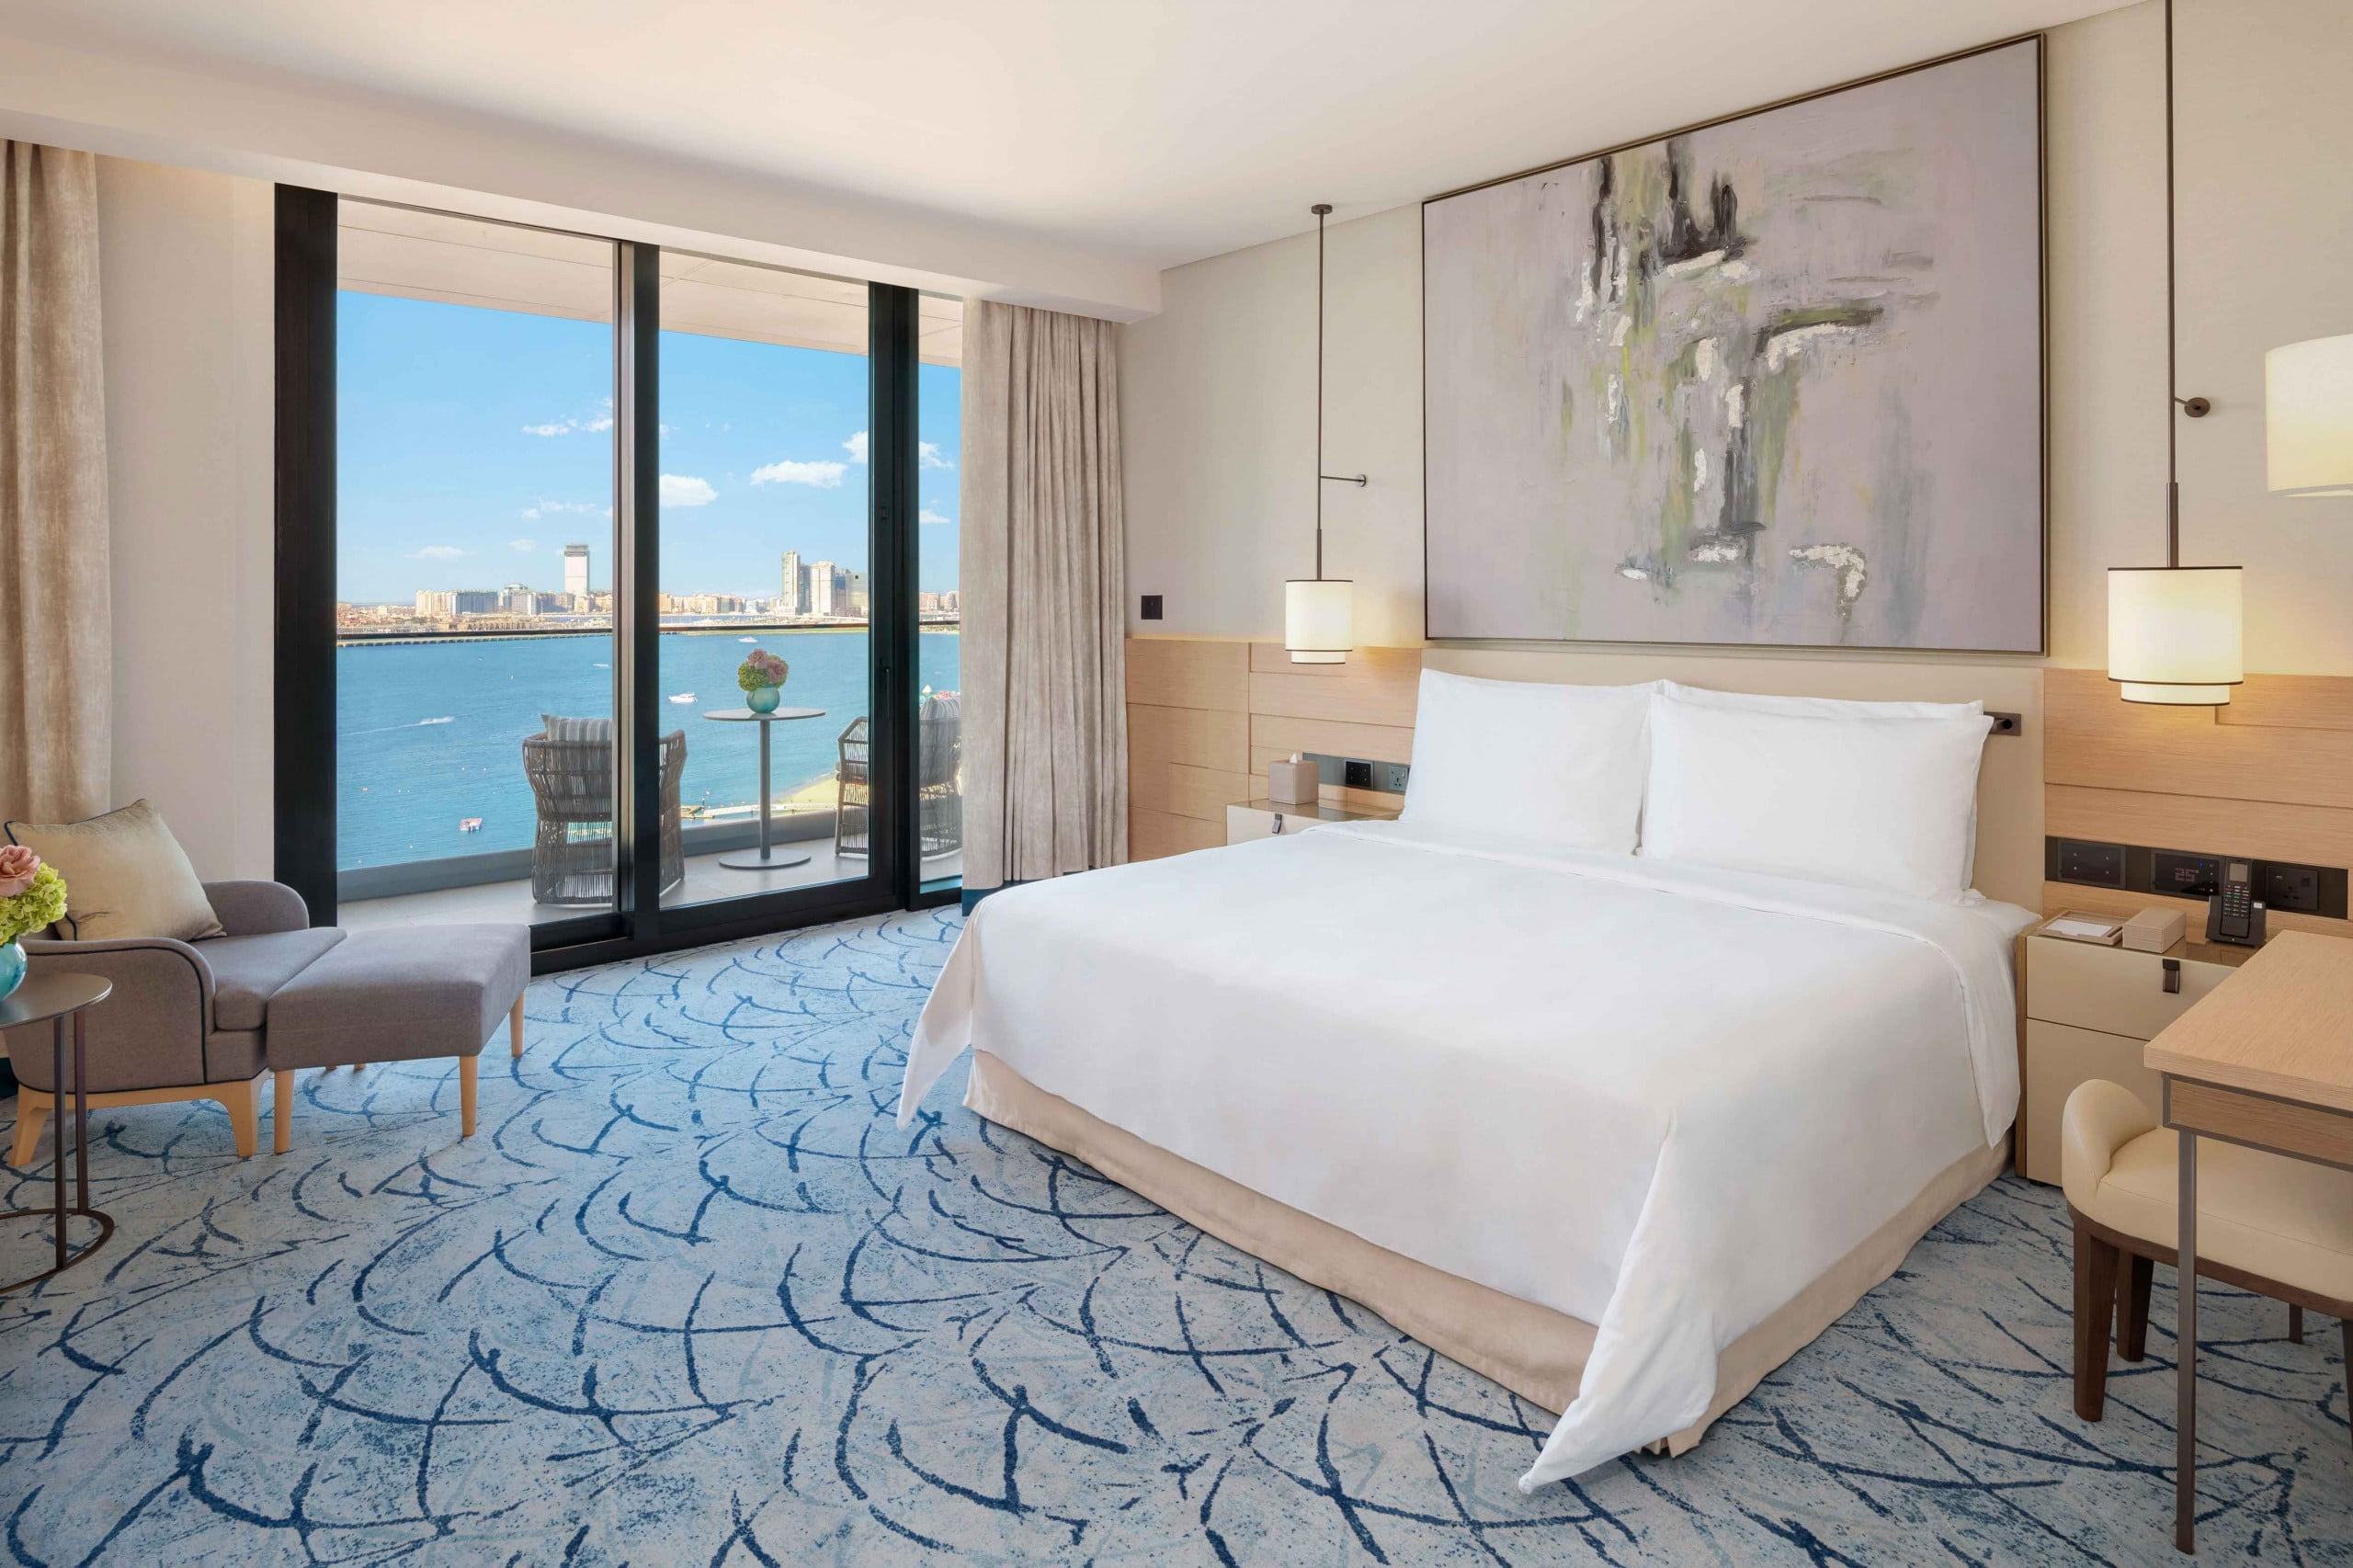 Presidential Suite Bedroom Sea Facing 26 scaled - Immobilier Dubai